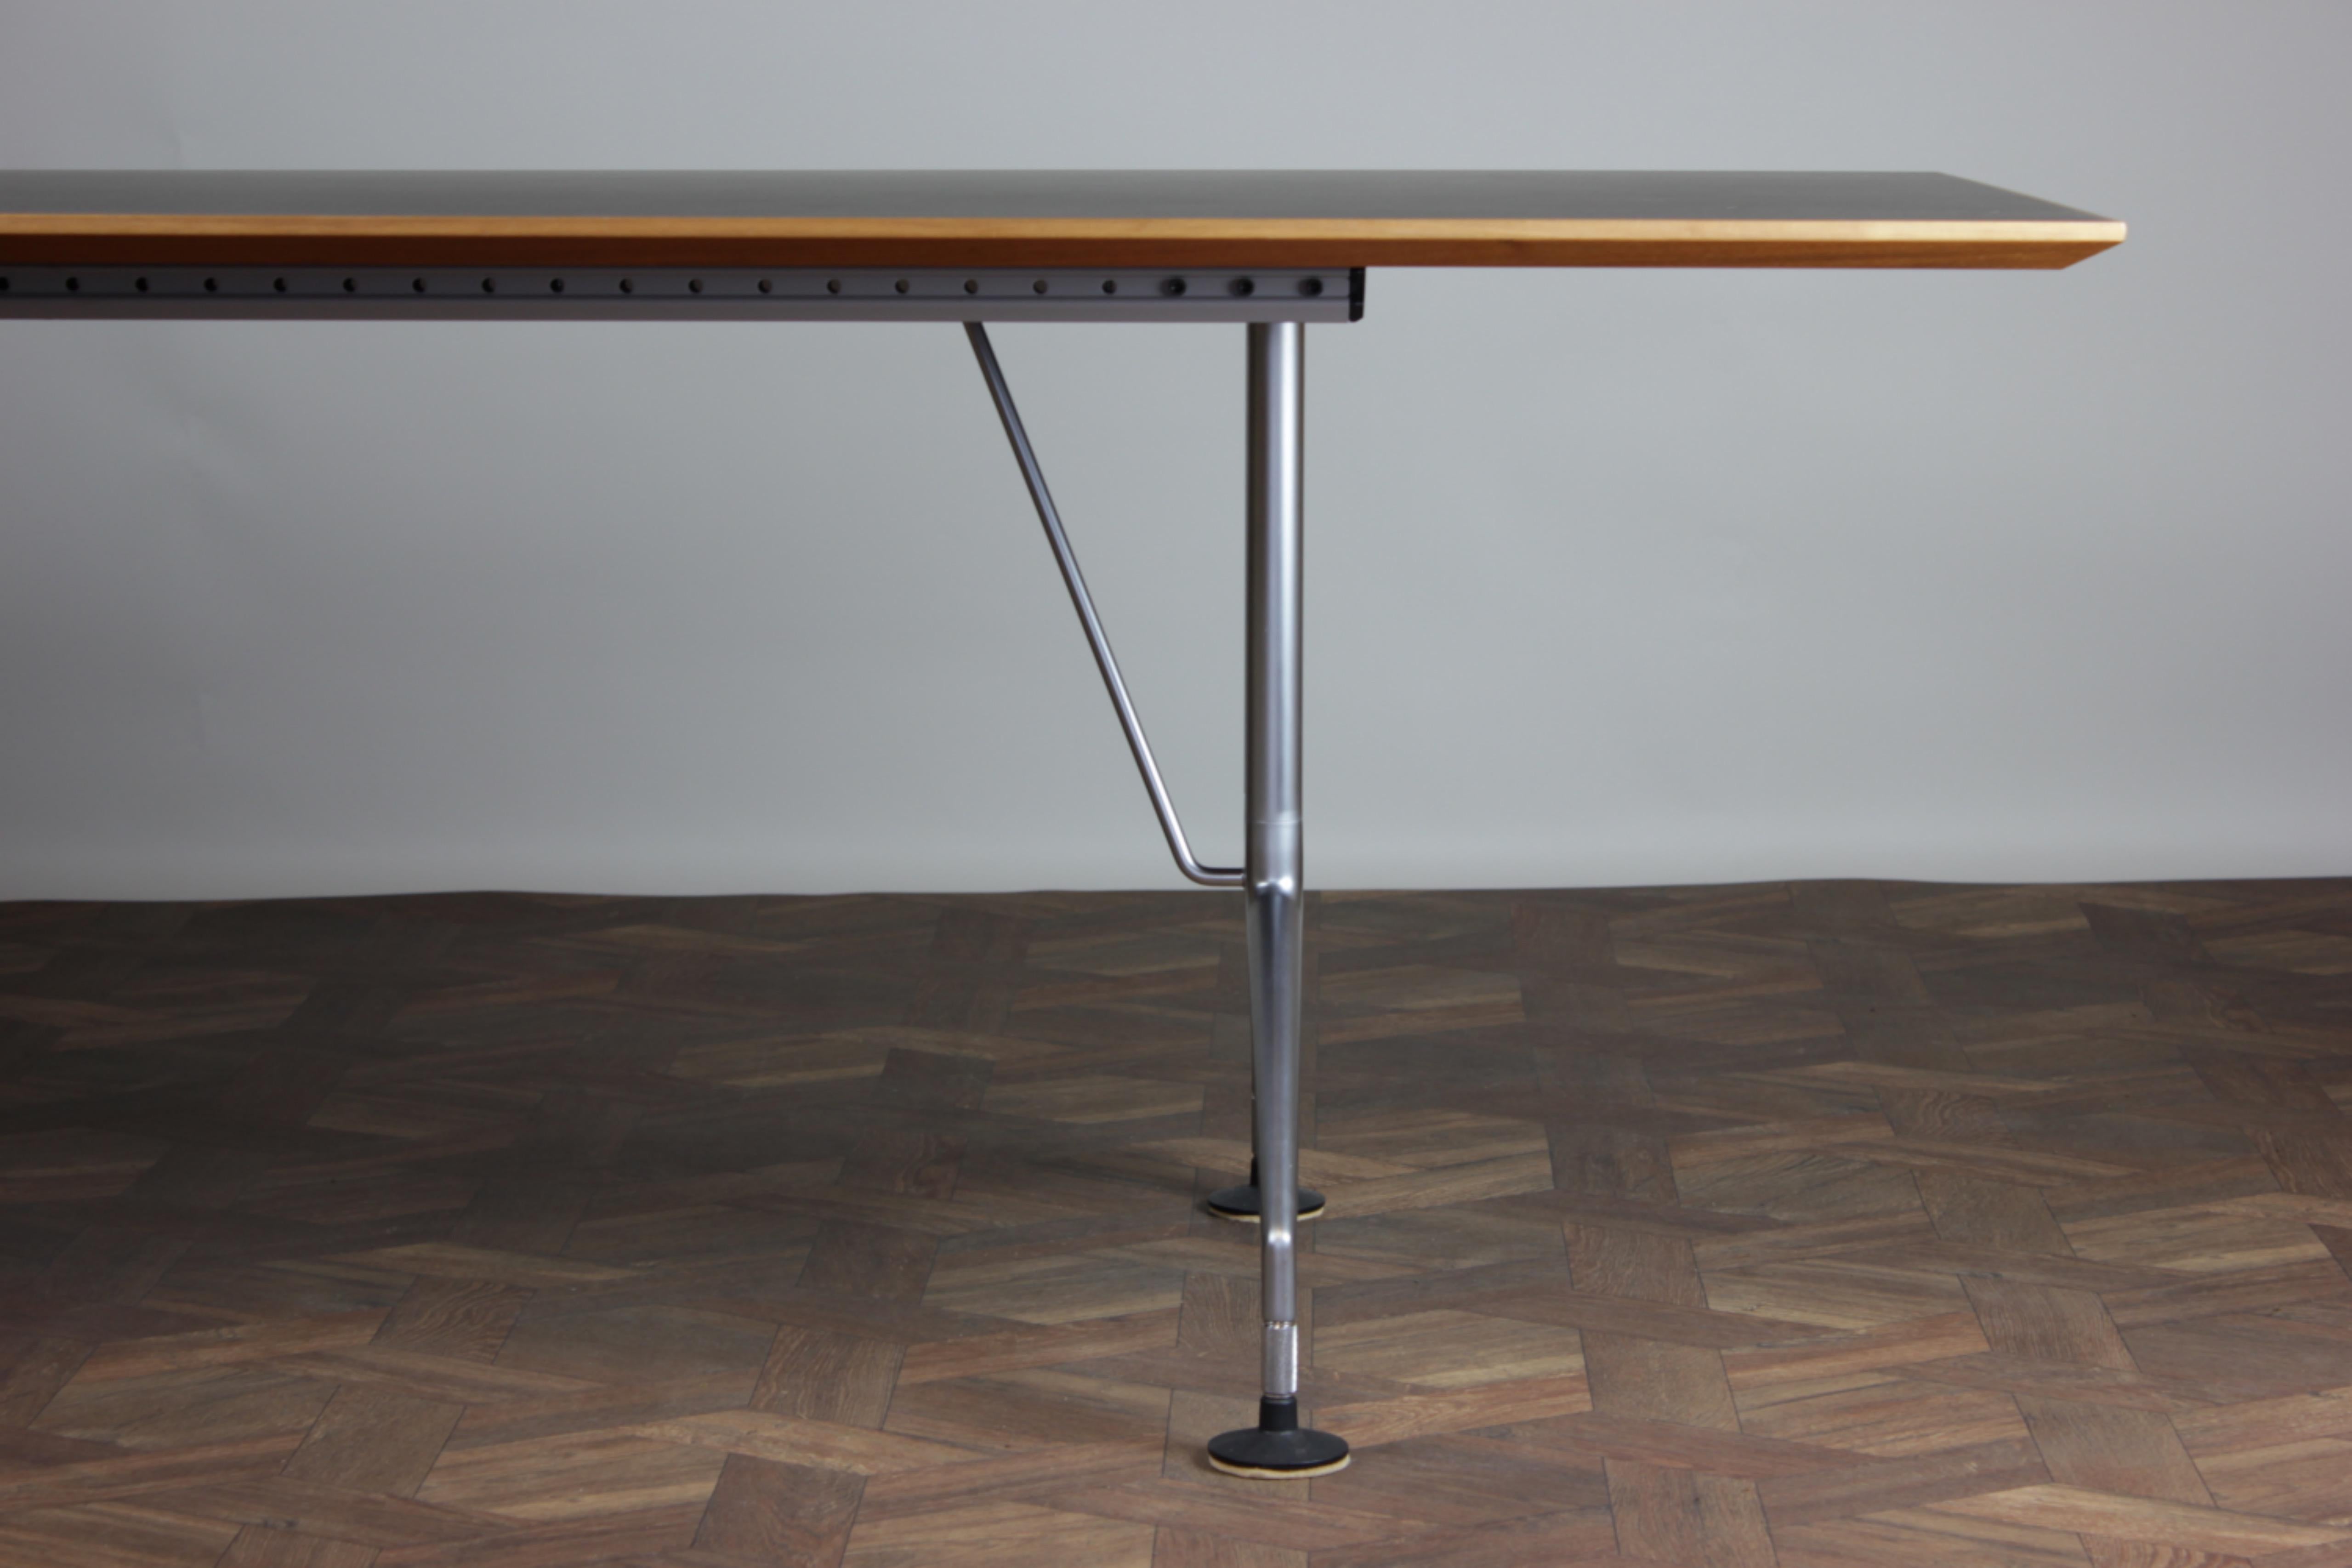 Late 20th Century Post Modern Dining Table by Antonio Citterio for Vitra